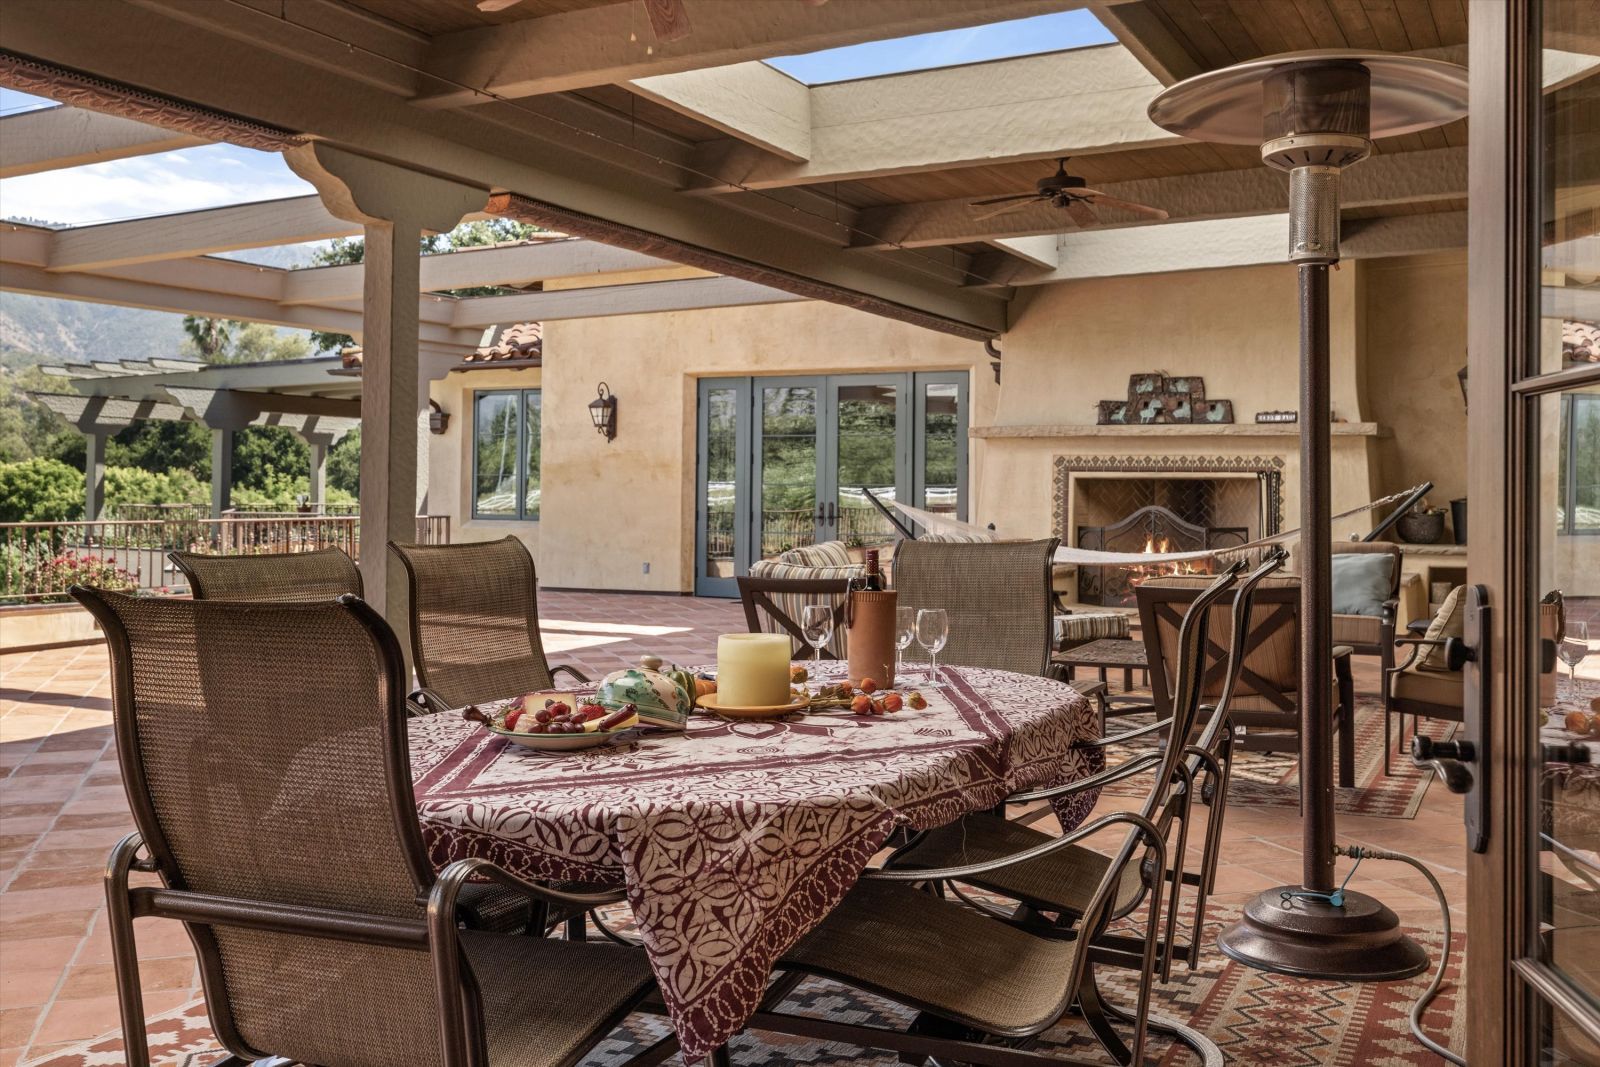 The table is set for al fresco dining on this luxury patio with a lit fireplace, pergola, and hills in the distance.